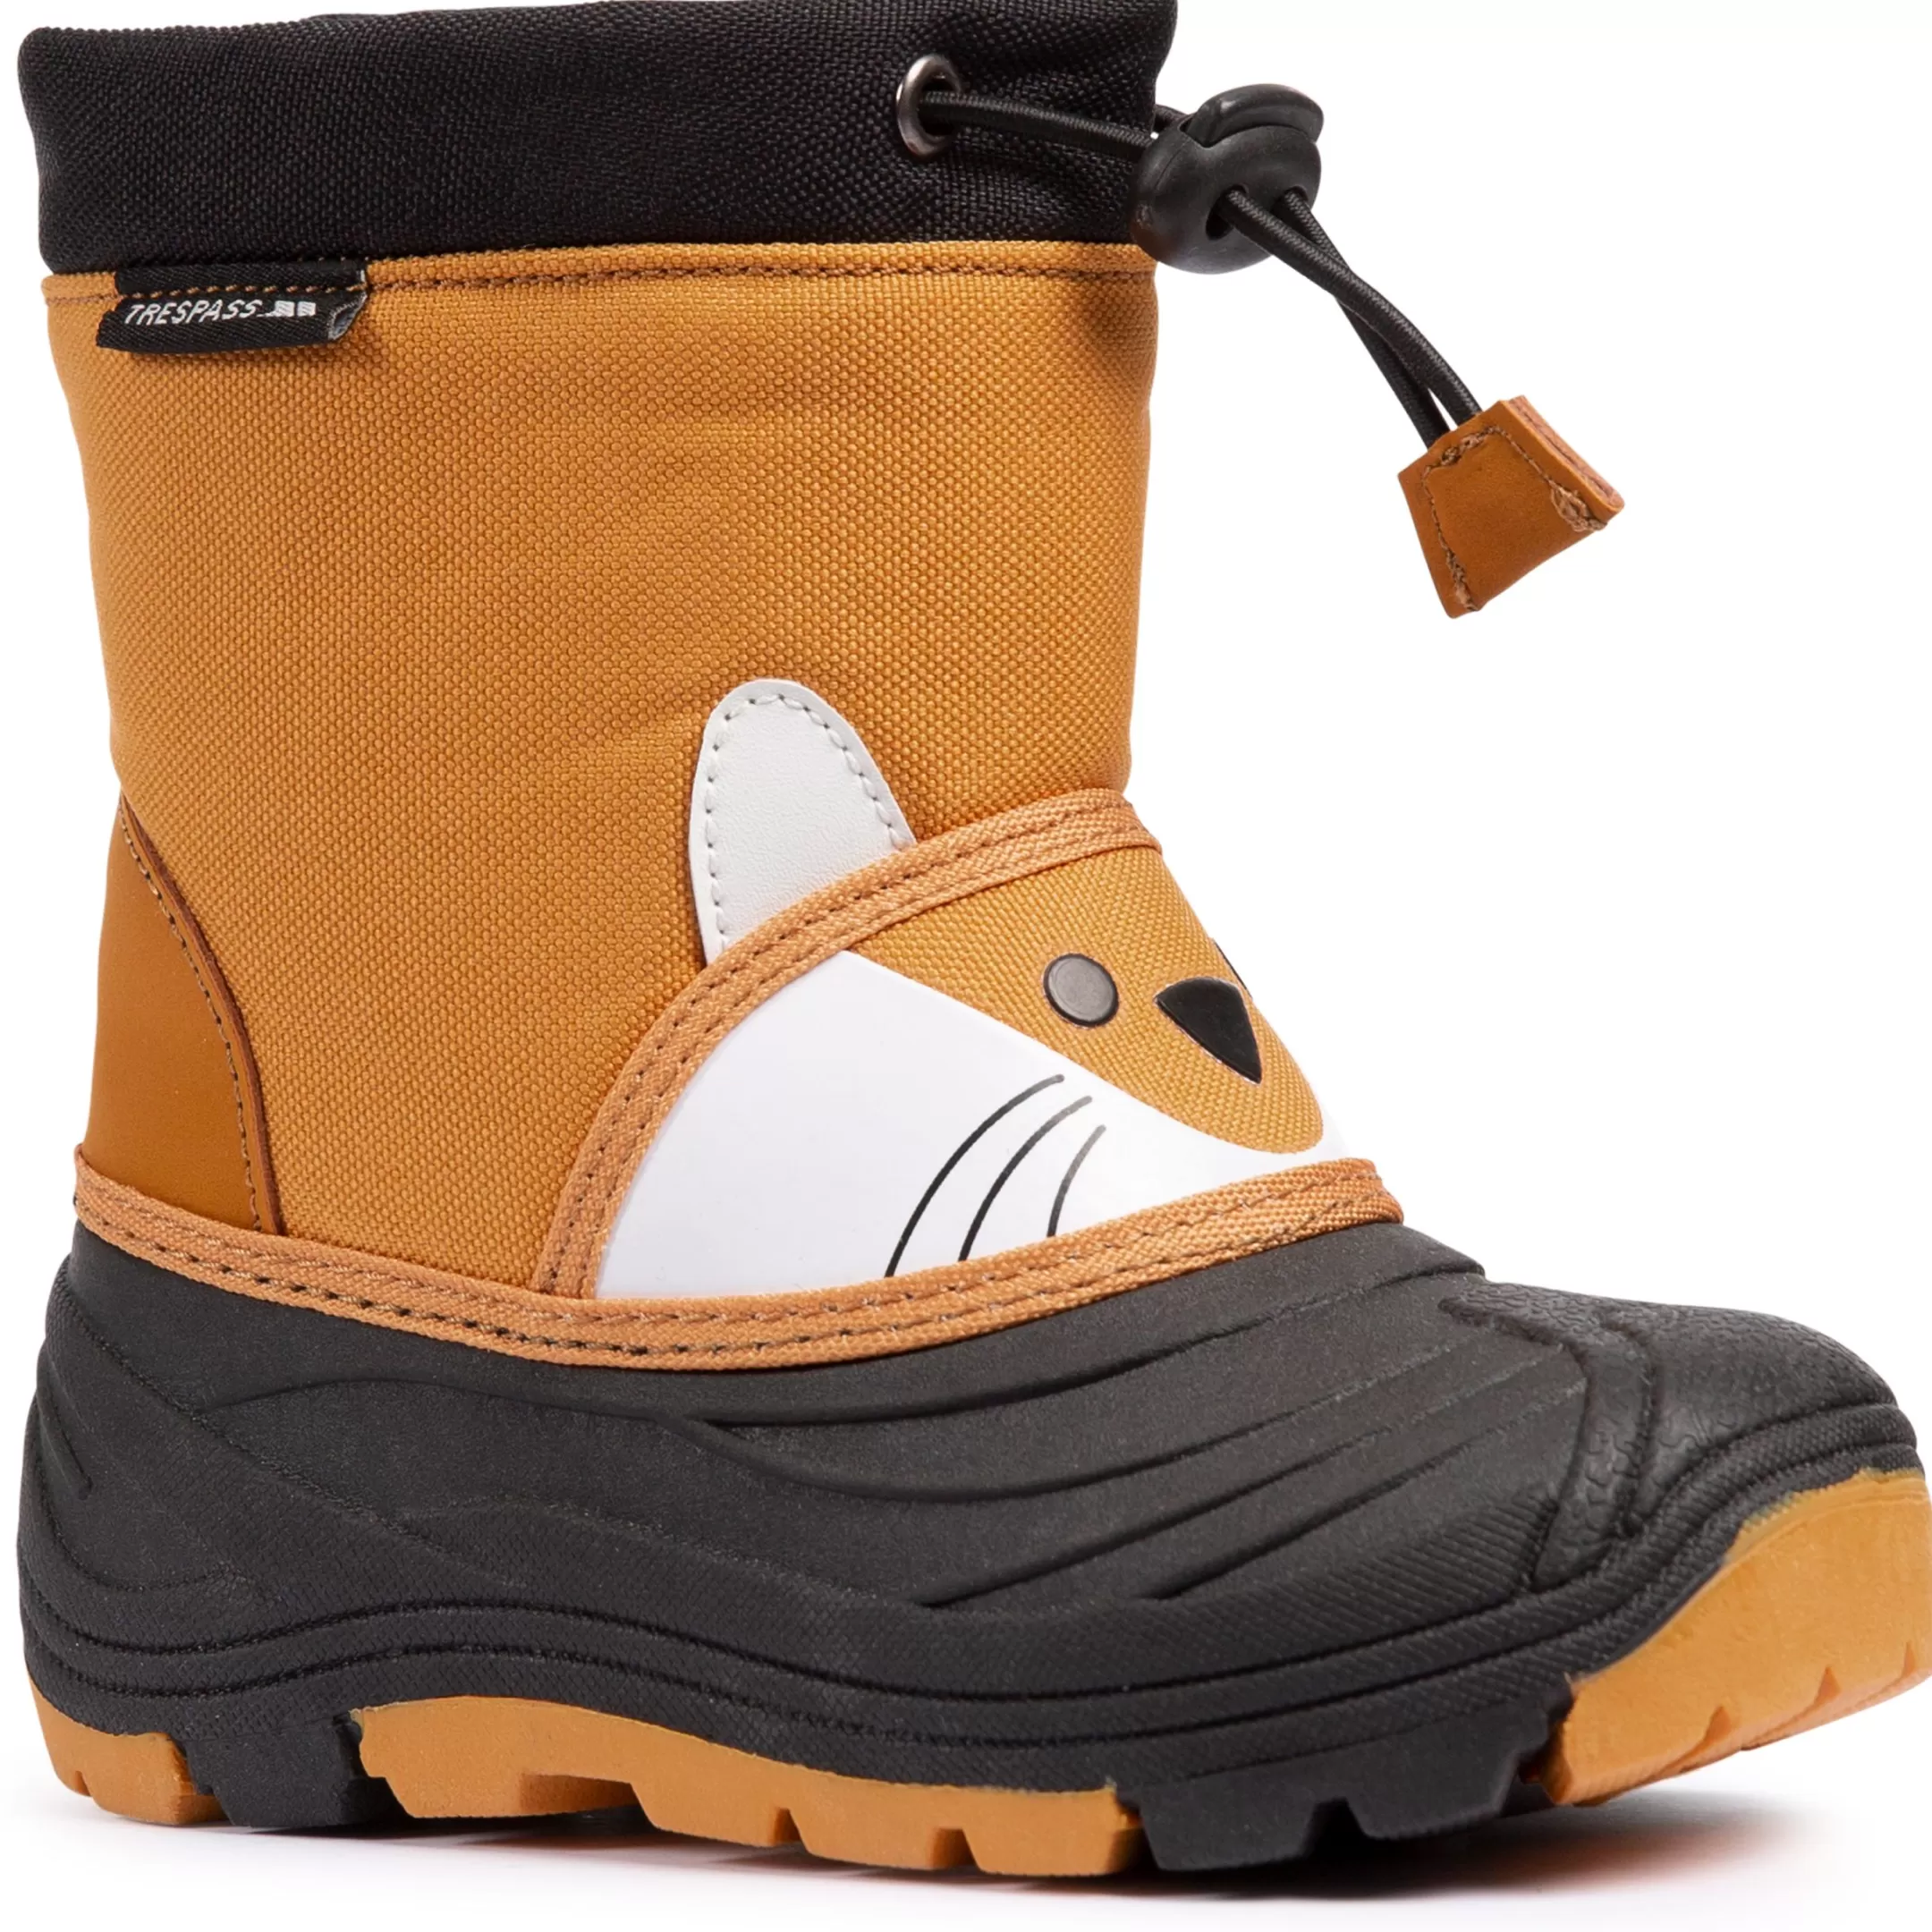 Toddlers' Unisex Snow Boots Koda | Trespass Outlet